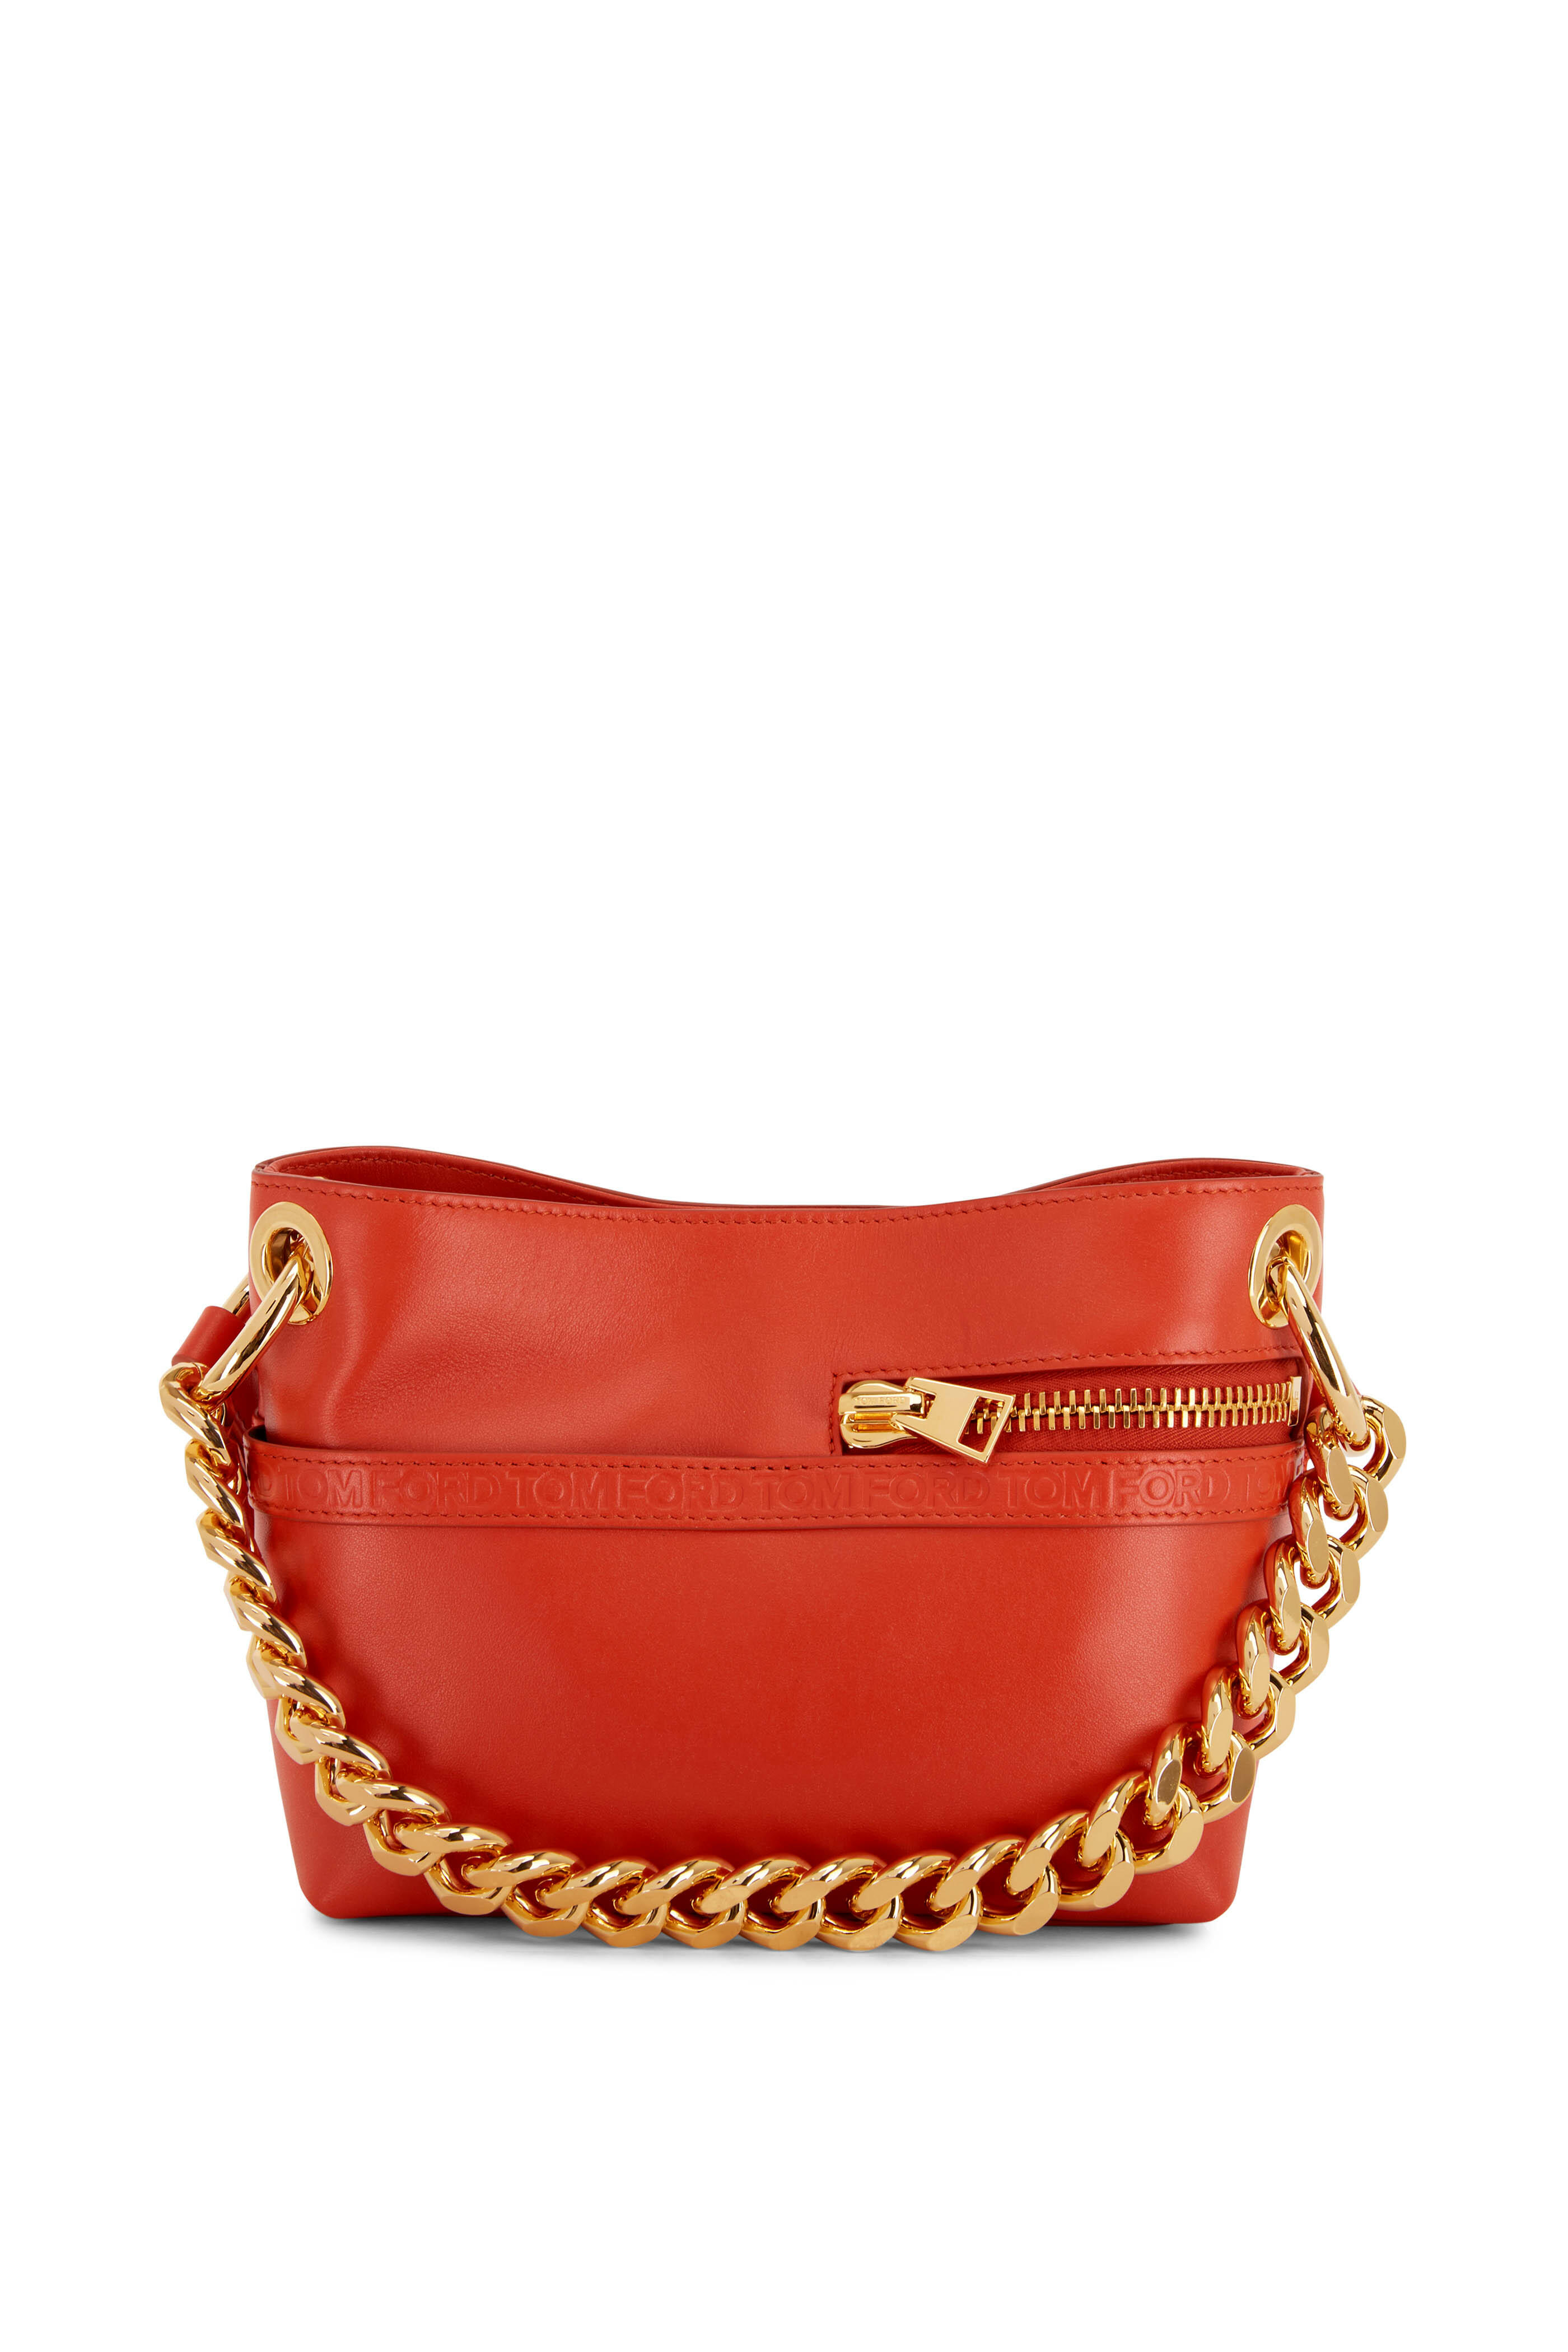 Tom Ford - Avery Mango Leather Small Chain Shoulder Bag